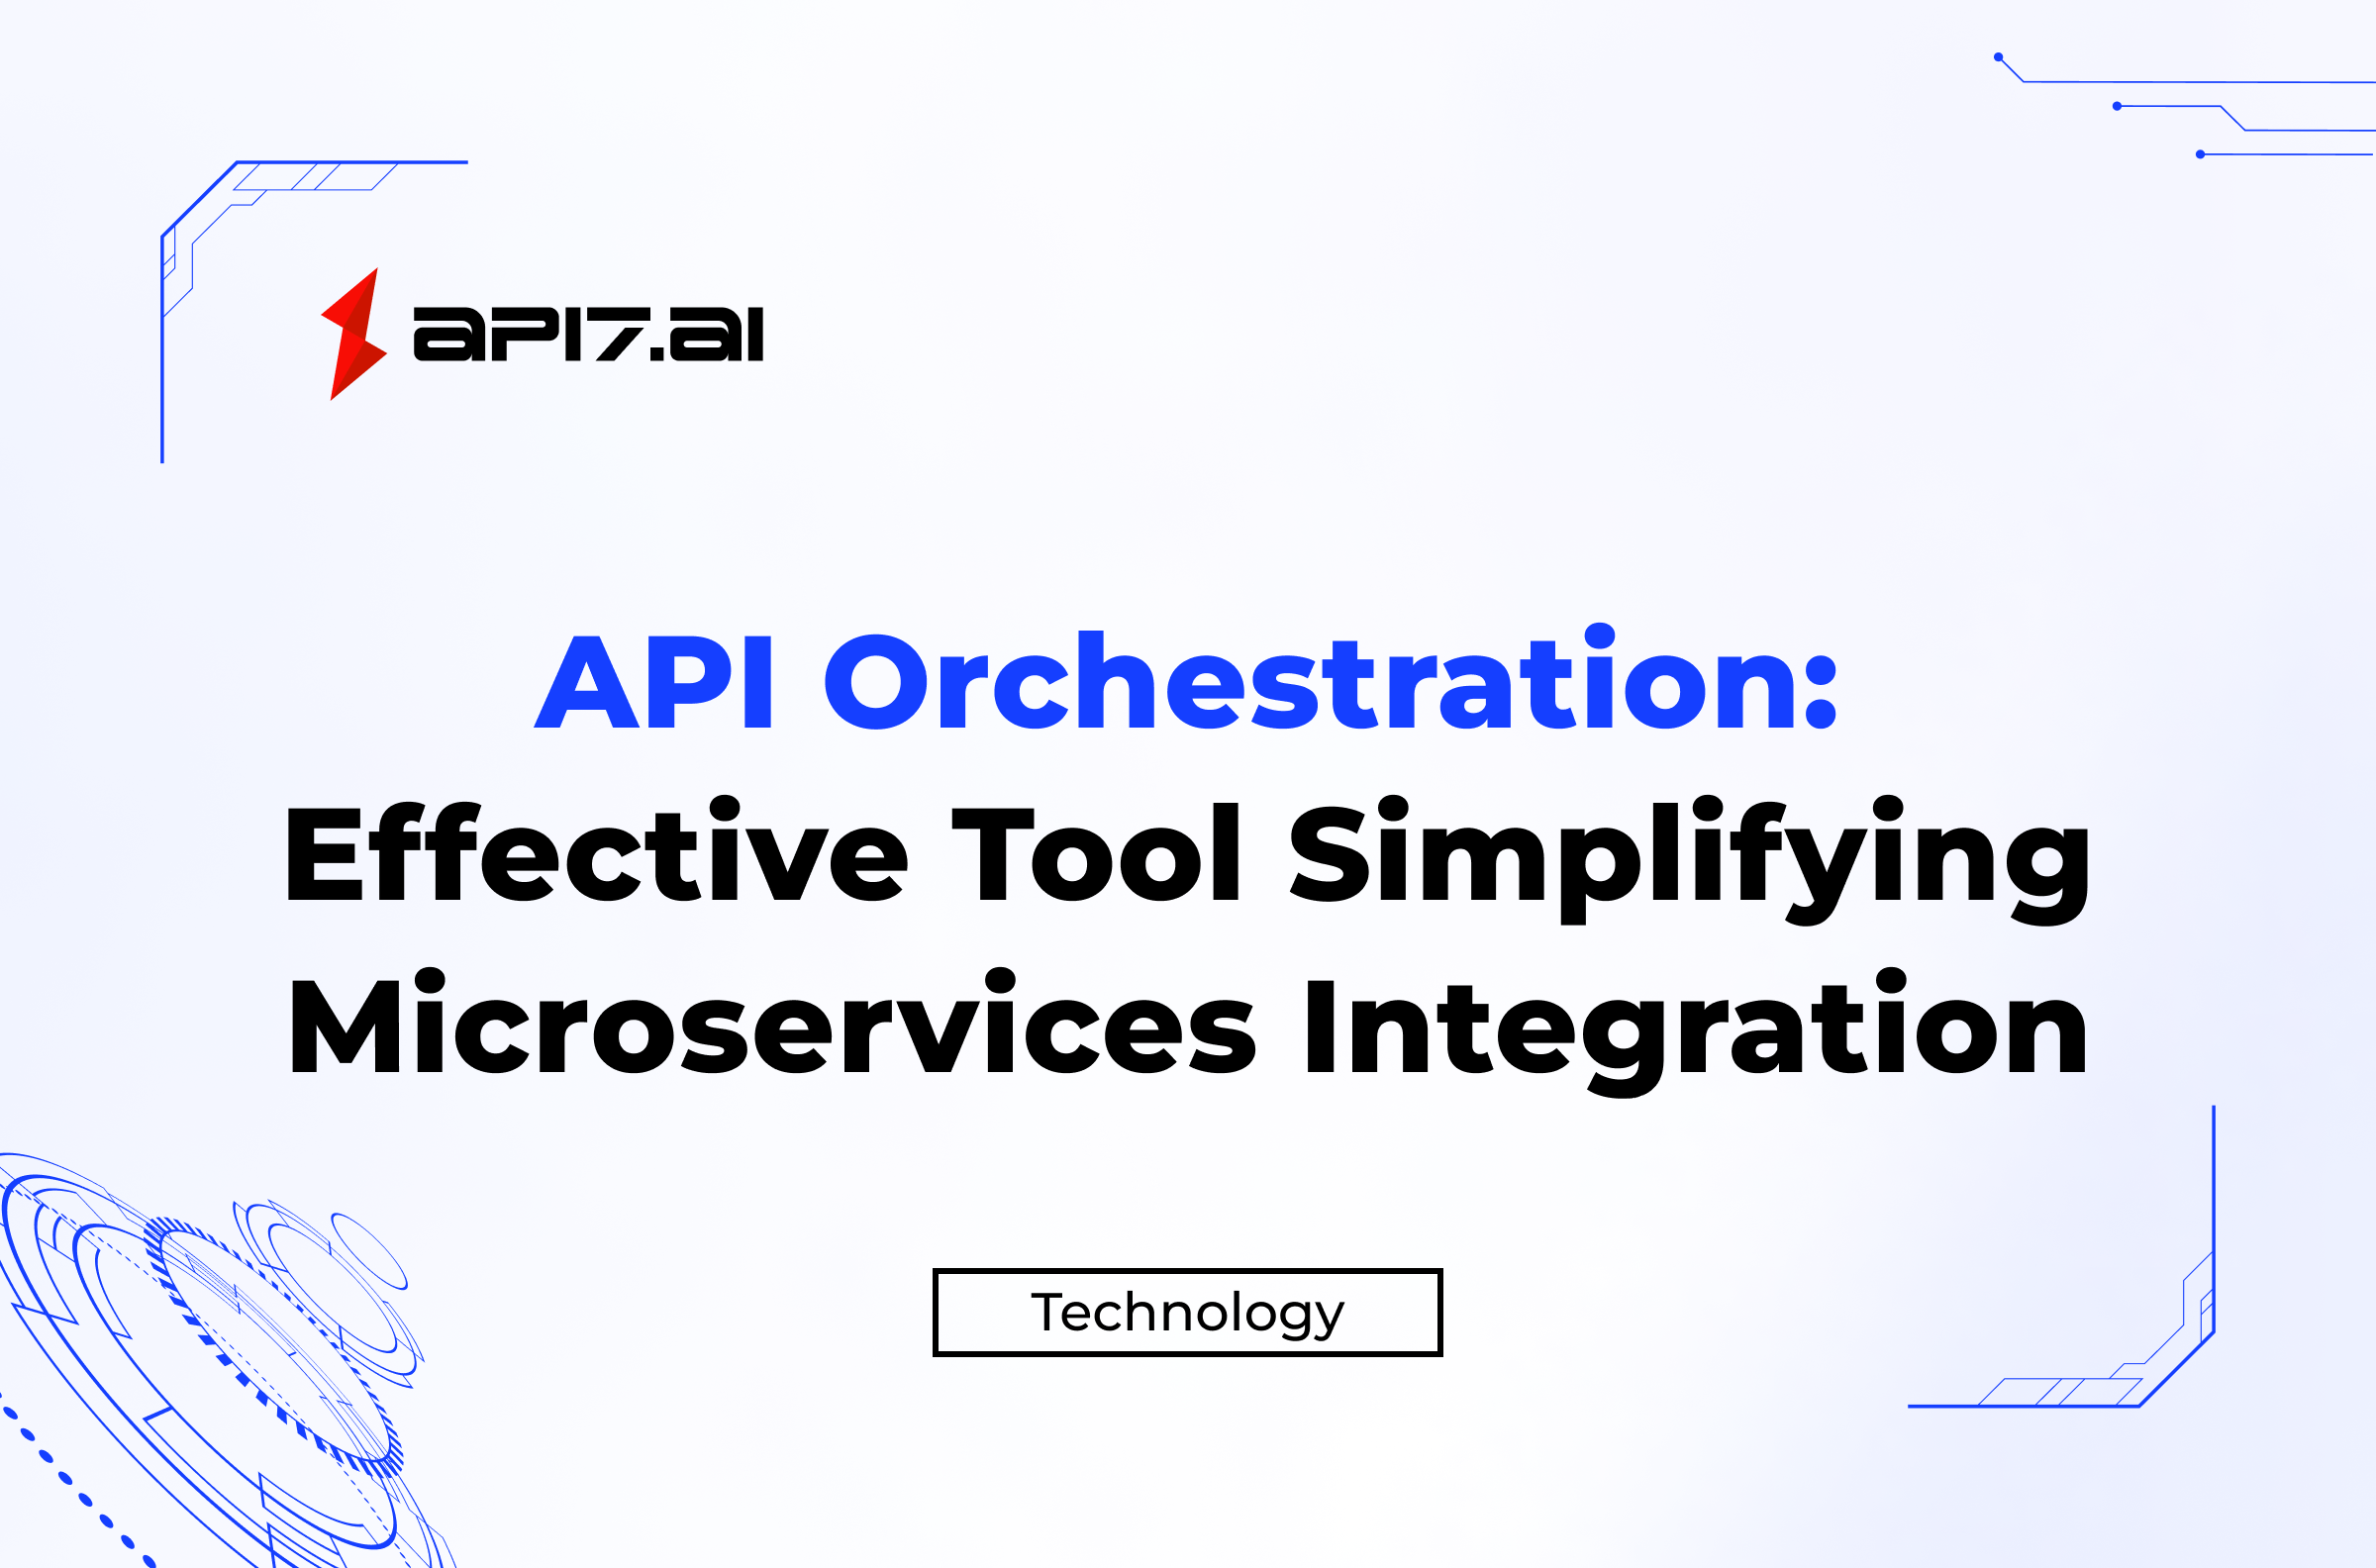 API Orchestration: An Effective Tool Simplifying Microservices Integration